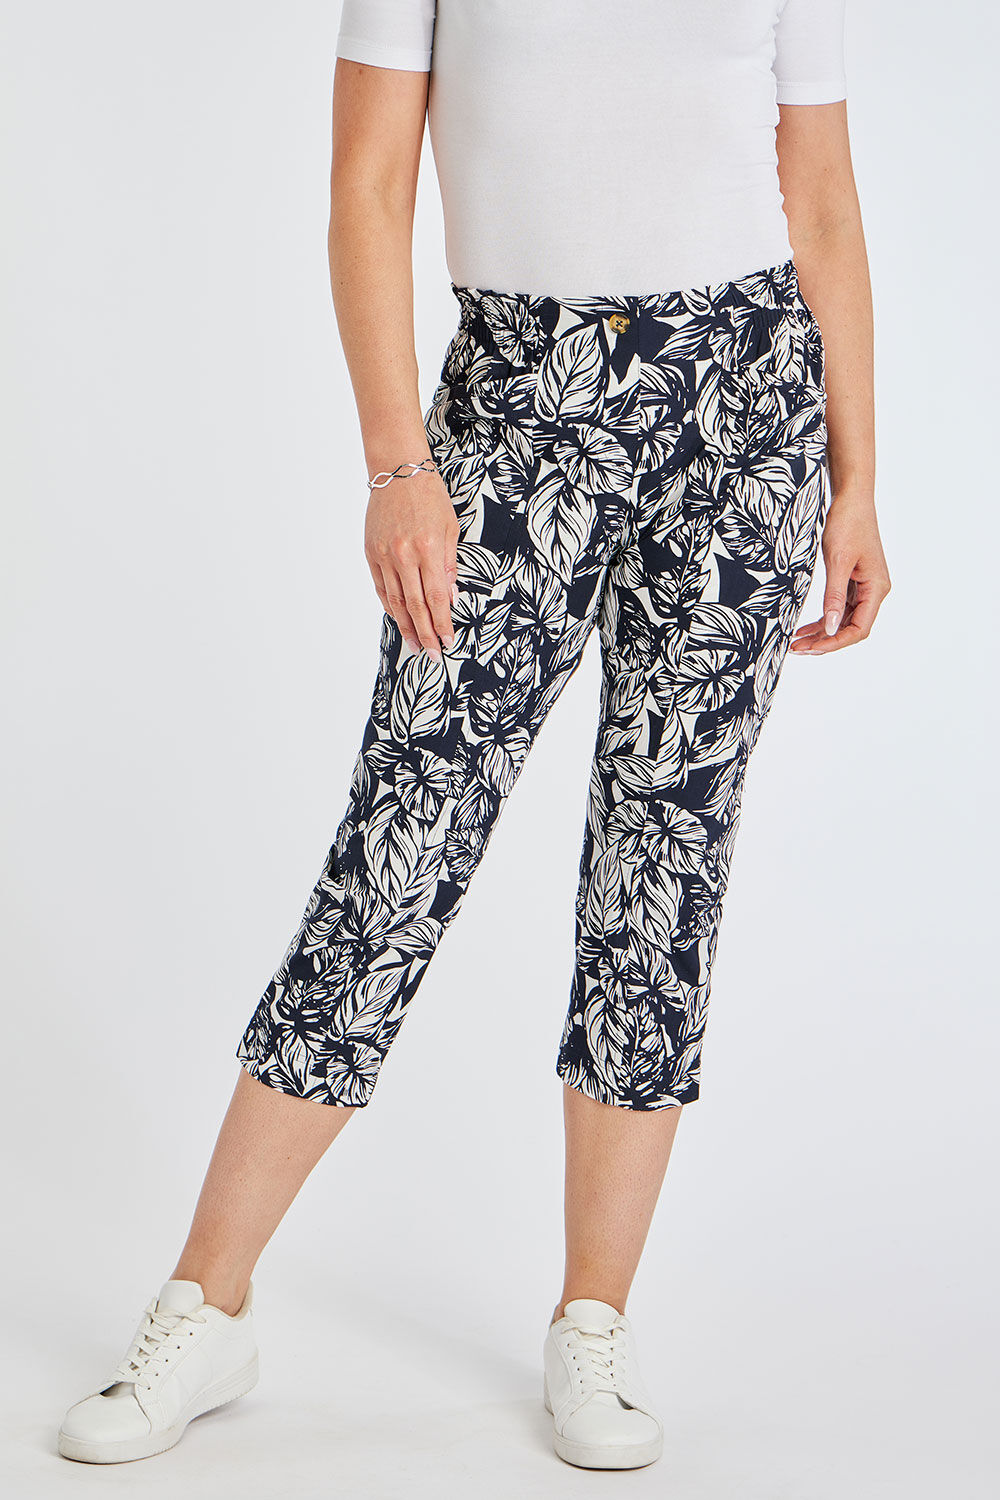 Bonmarche Navy Leaf Print Elasticated Back Essential Cropped Trousers, Size: 18